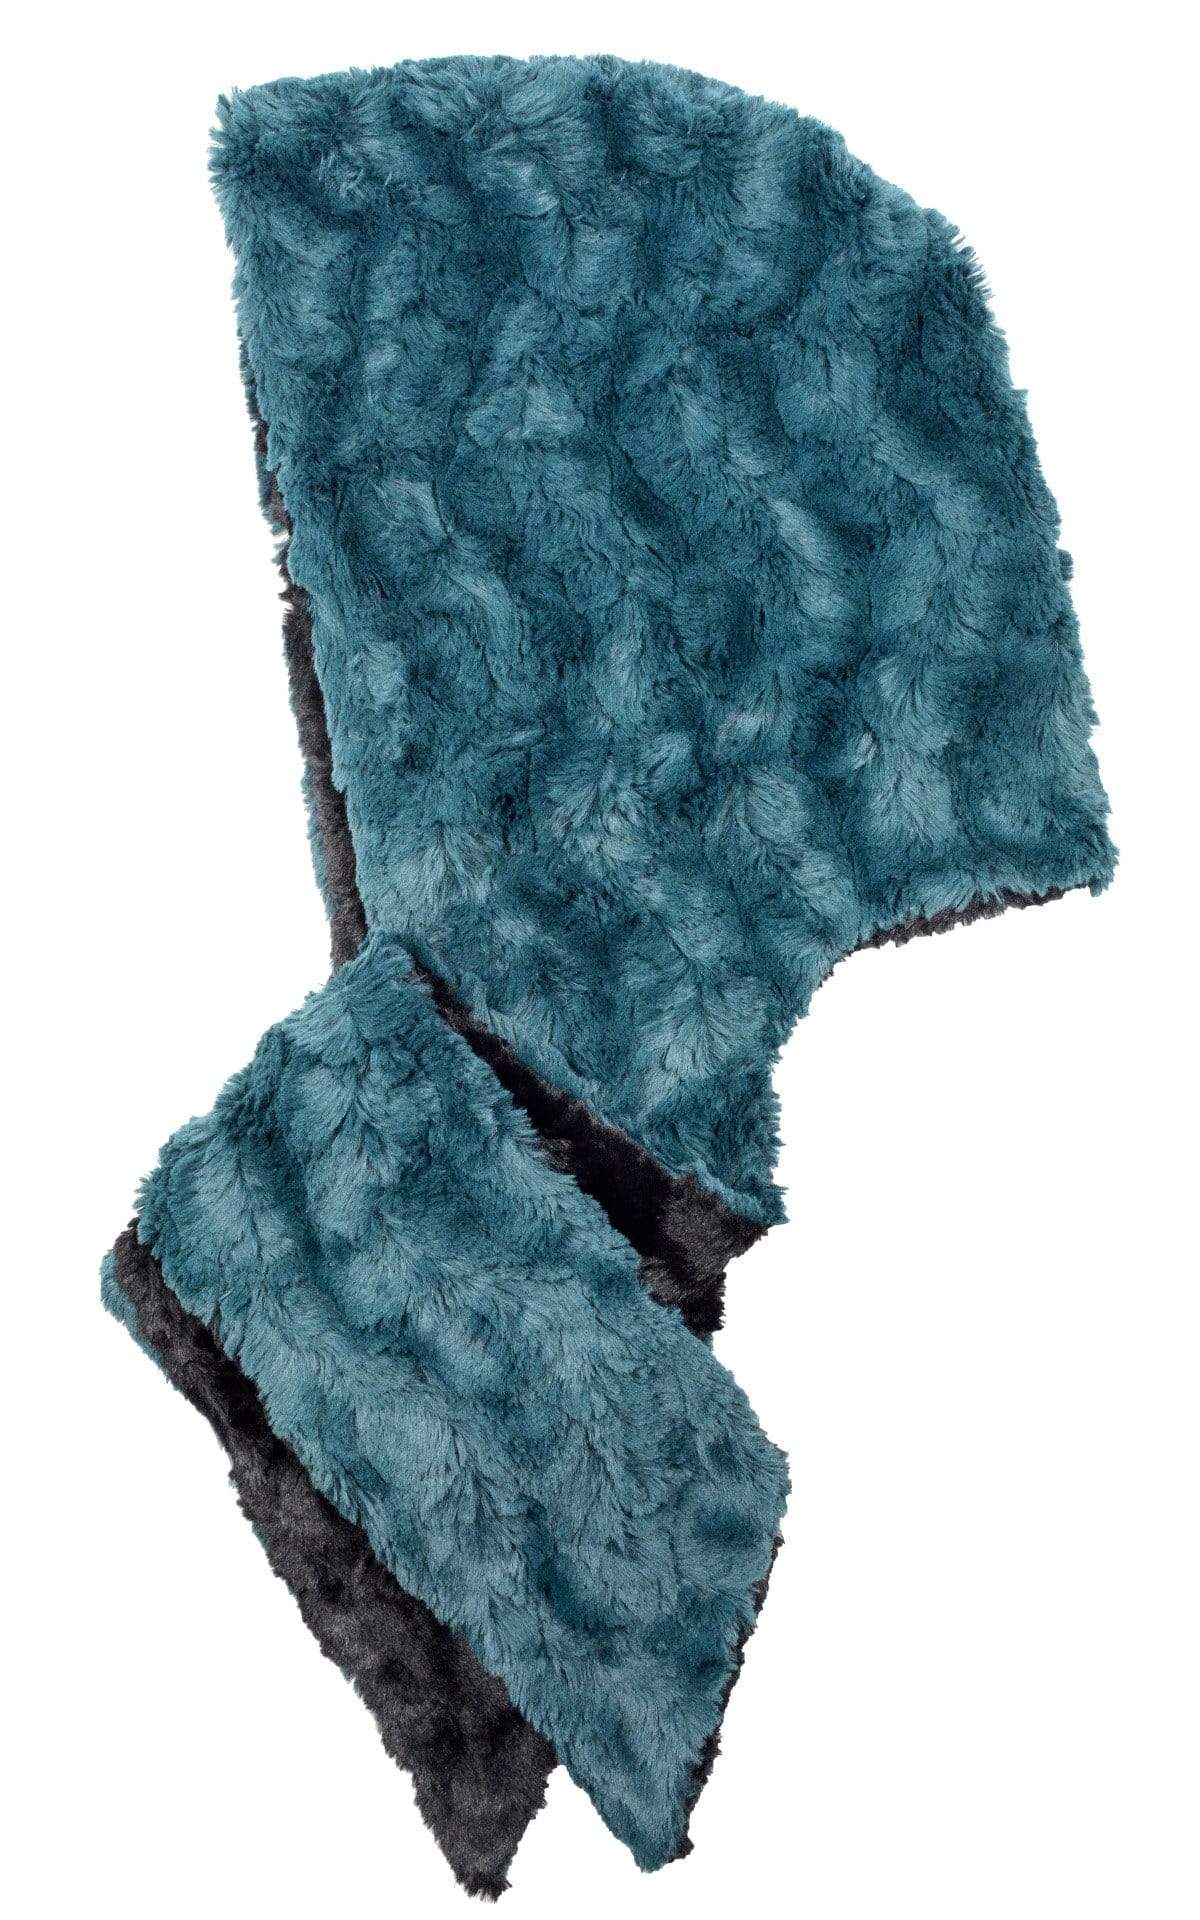 Hoody Scarf - Luxury Faux Fur in Peacock Pond with Cuddly Fur in Black